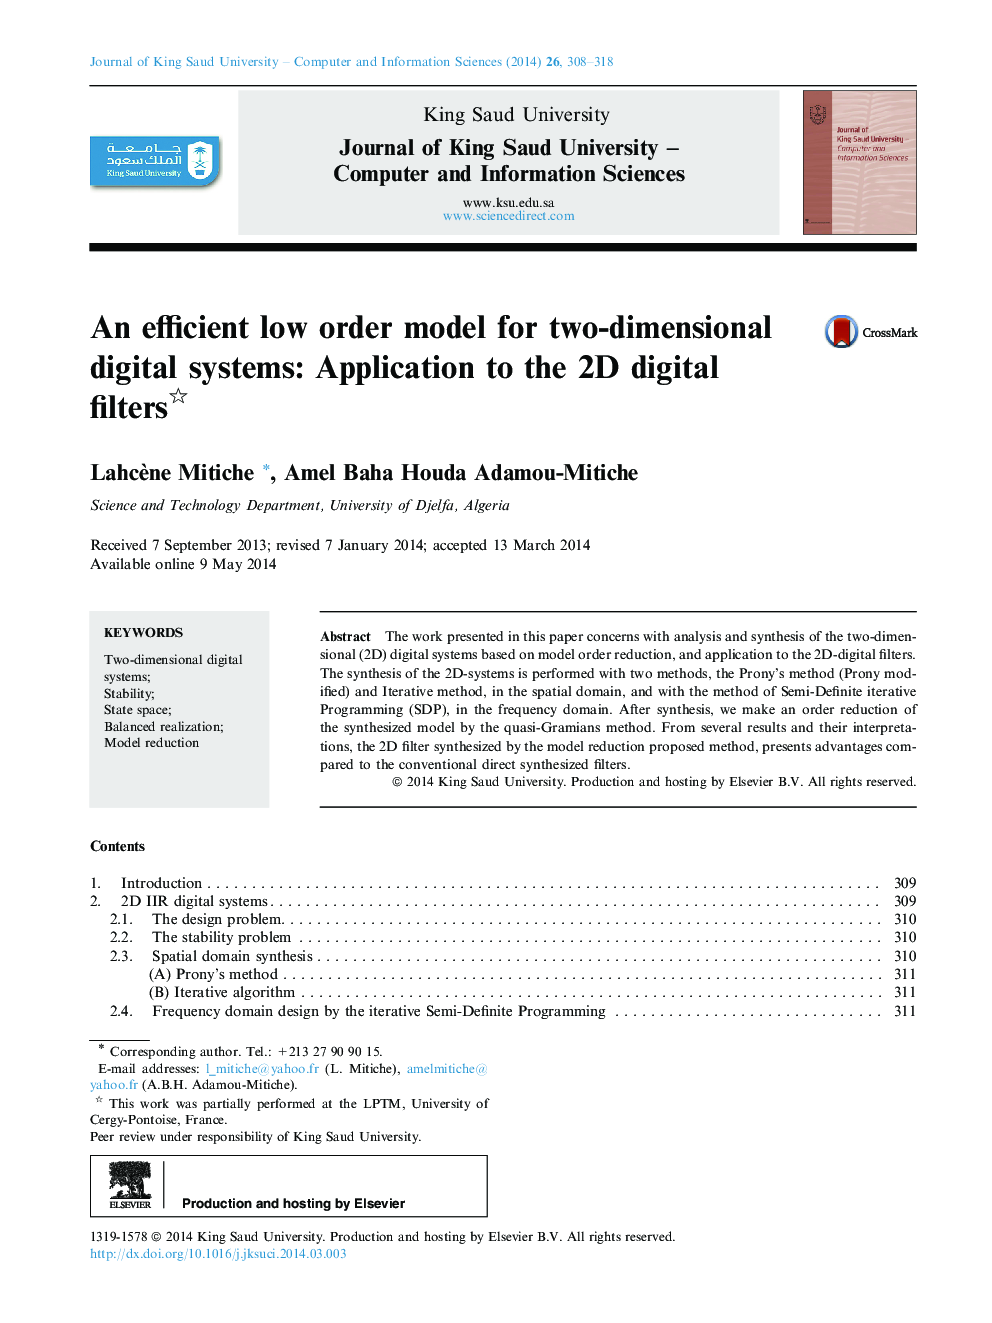 An efficient low order model for two-dimensional digital systems: Application to the 2D digital filters 